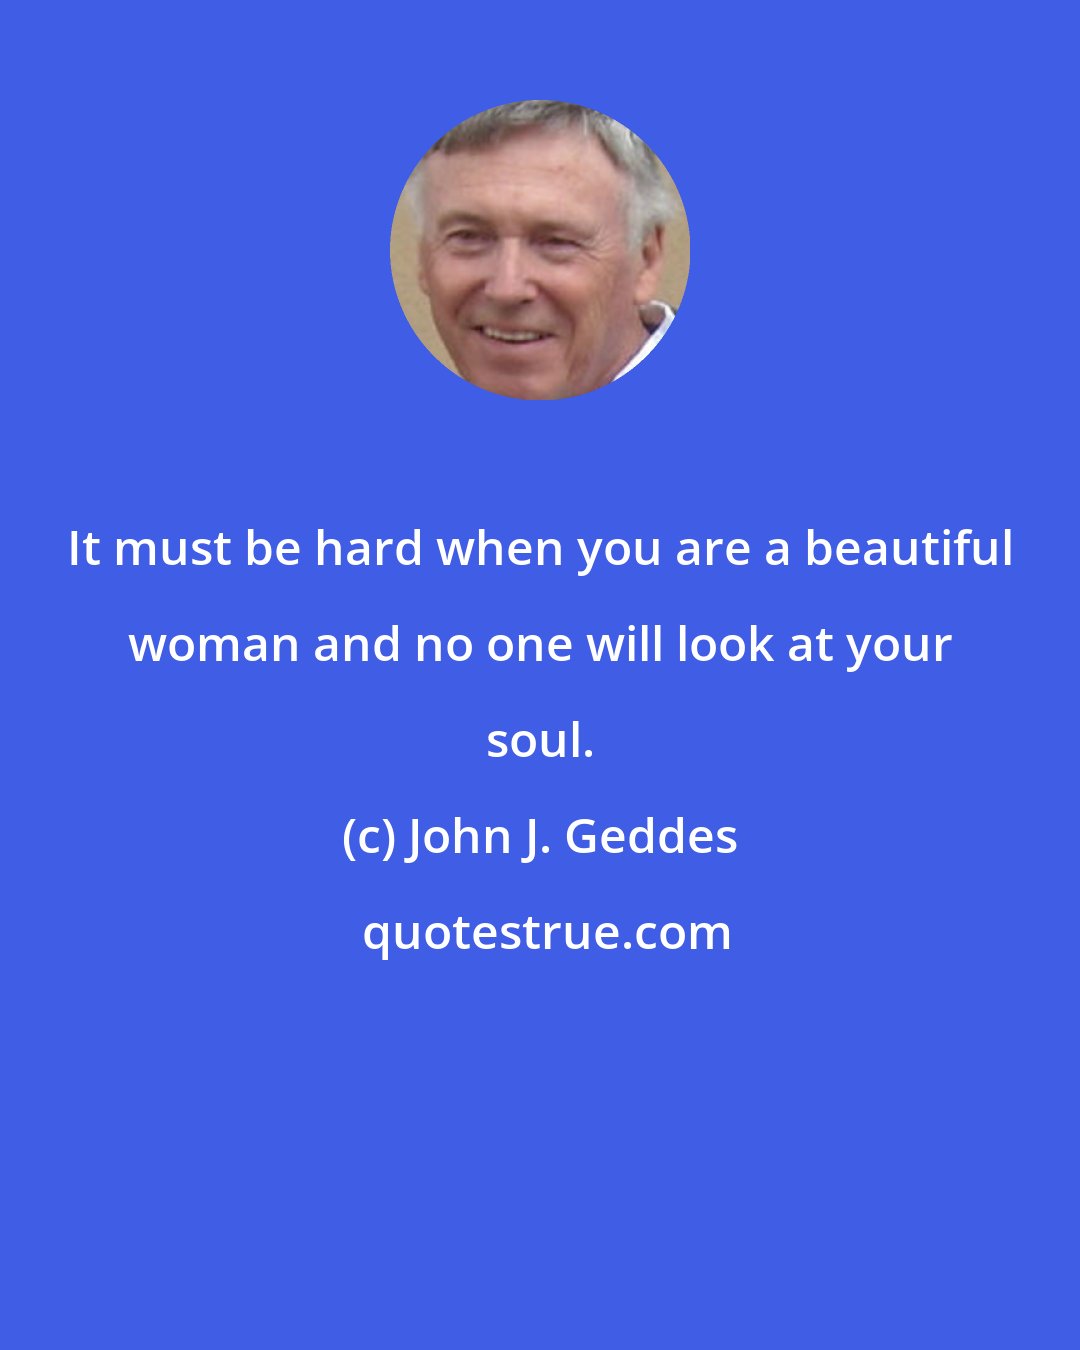 John J. Geddes: It must be hard when you are a beautiful woman and no one will look at your soul.